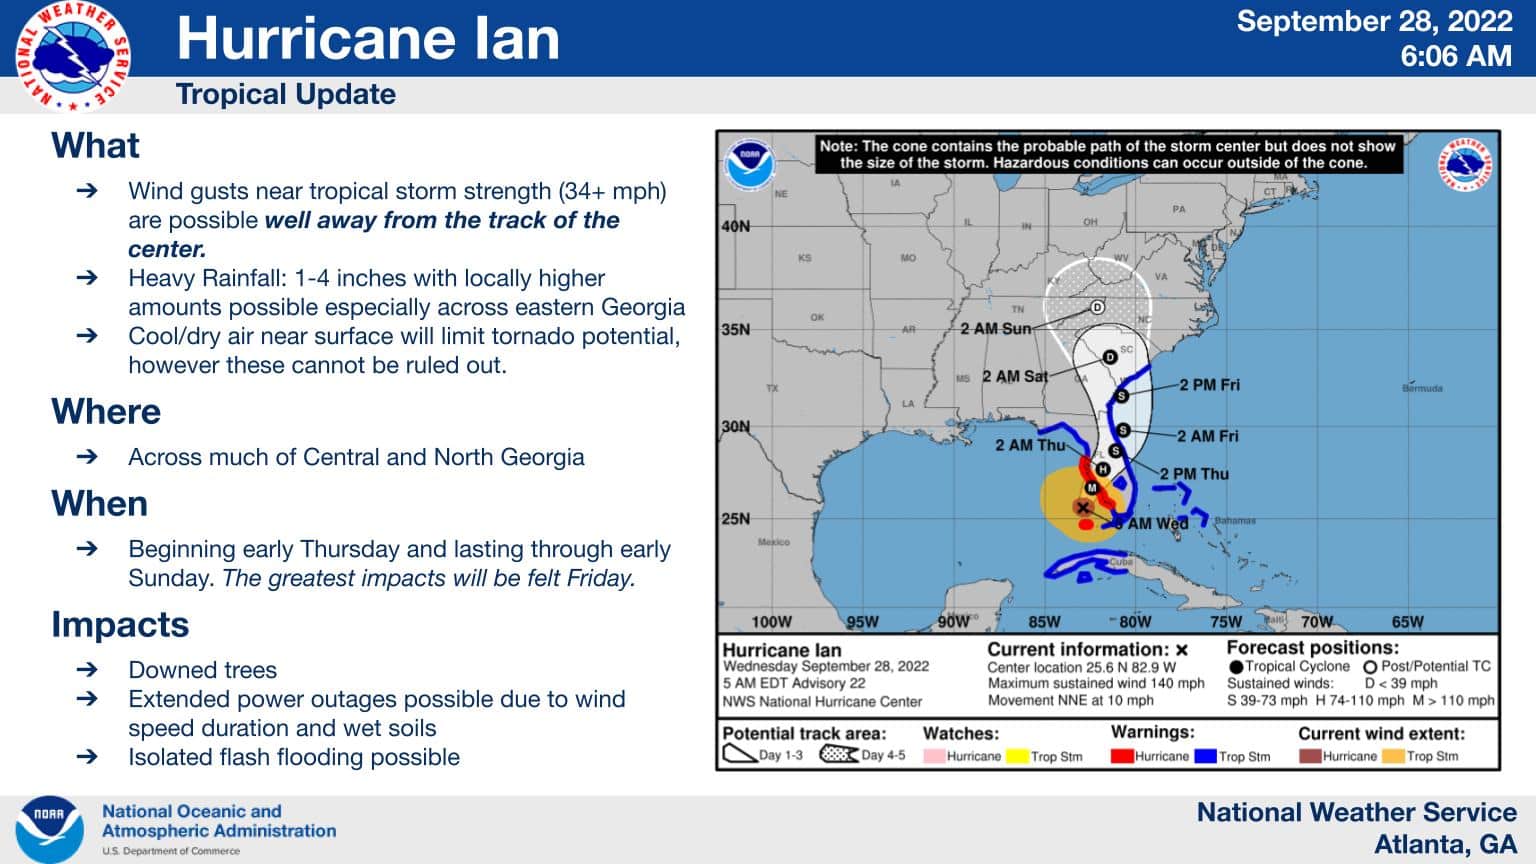 State of local emergency declared in Savannah as Hurricane Ian approaches